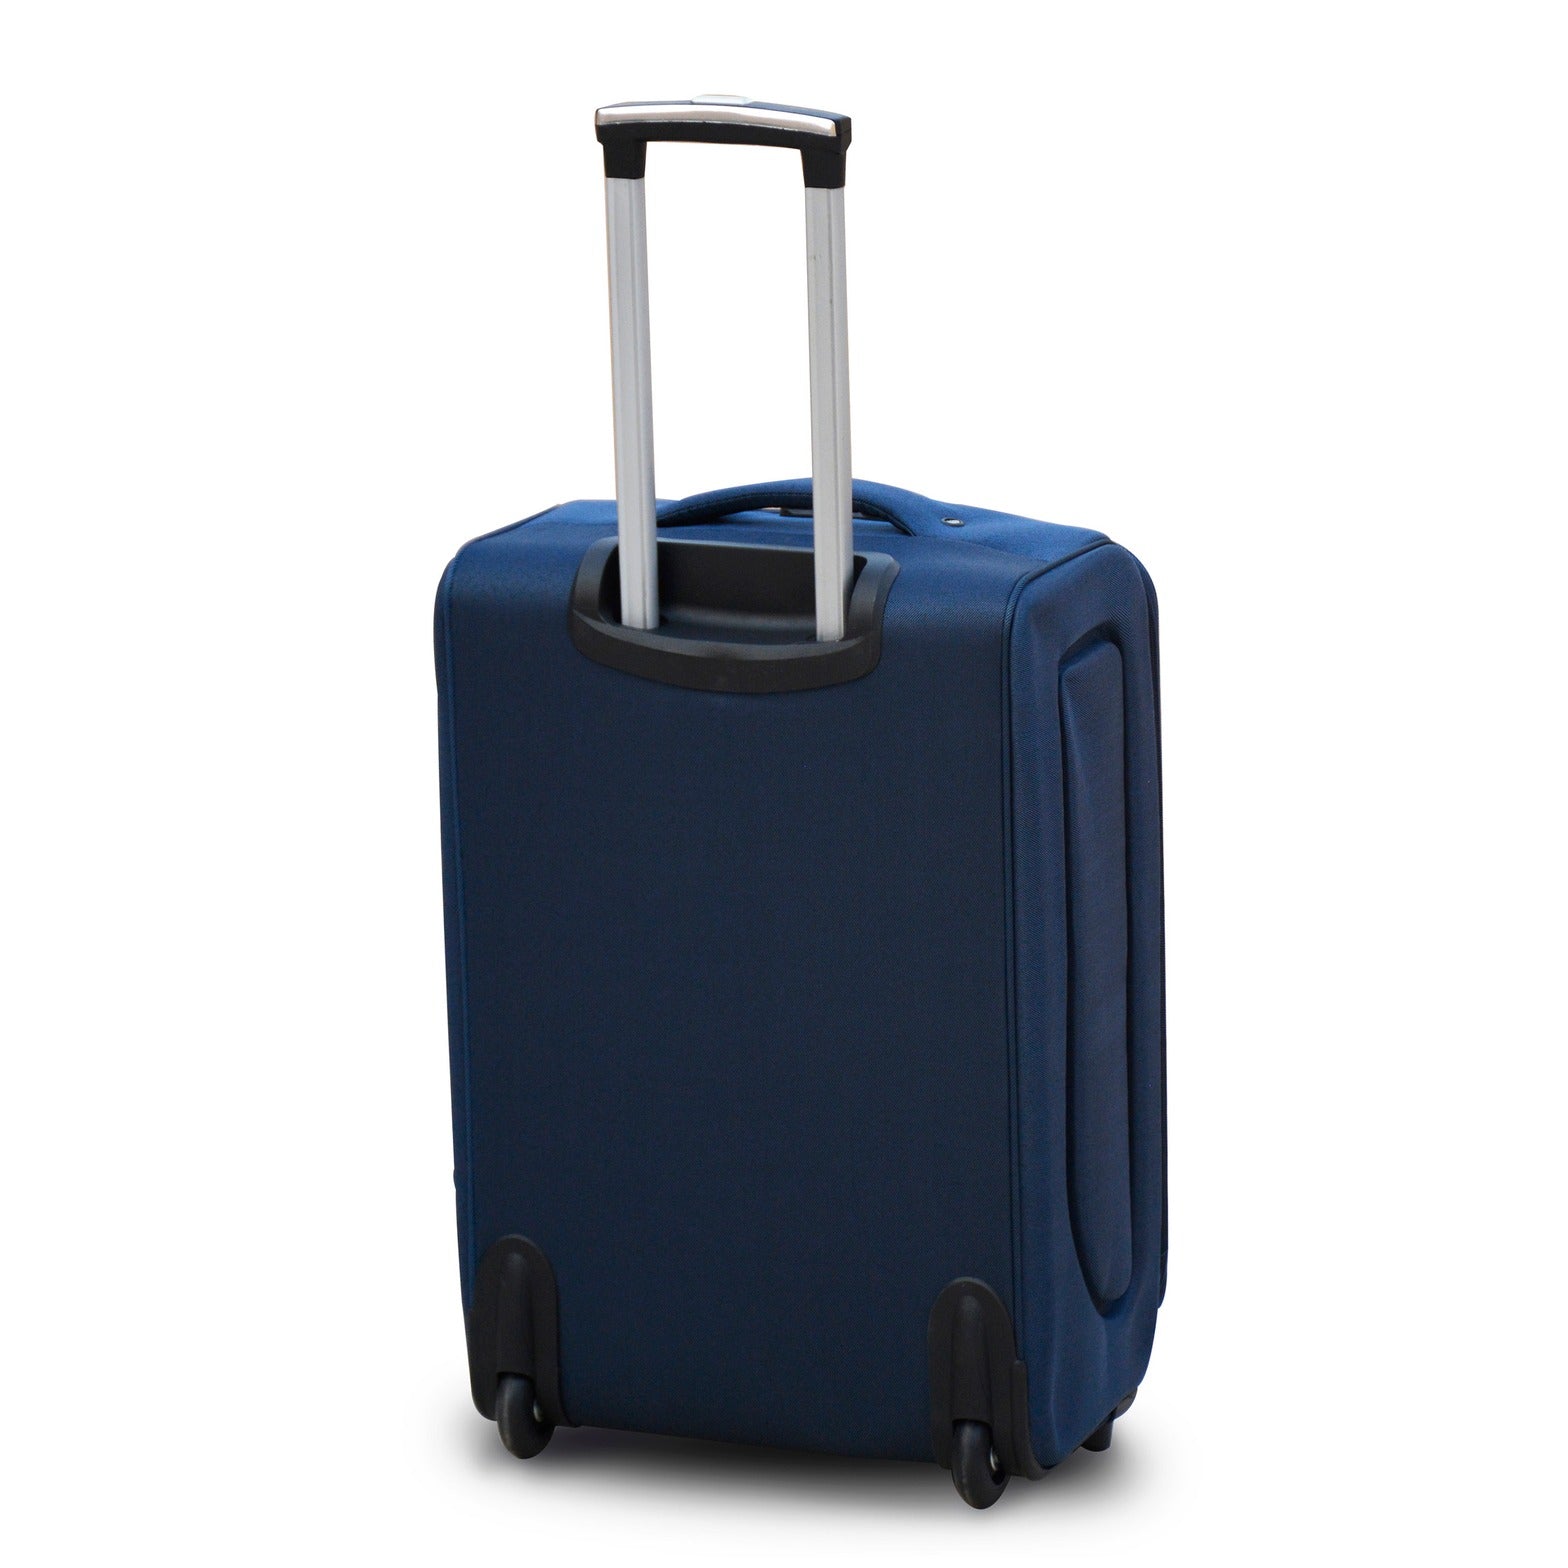 24" Blue Colour LP 2  Wheel 0161 Luggage Lightweight Soft Material Trolley Bag